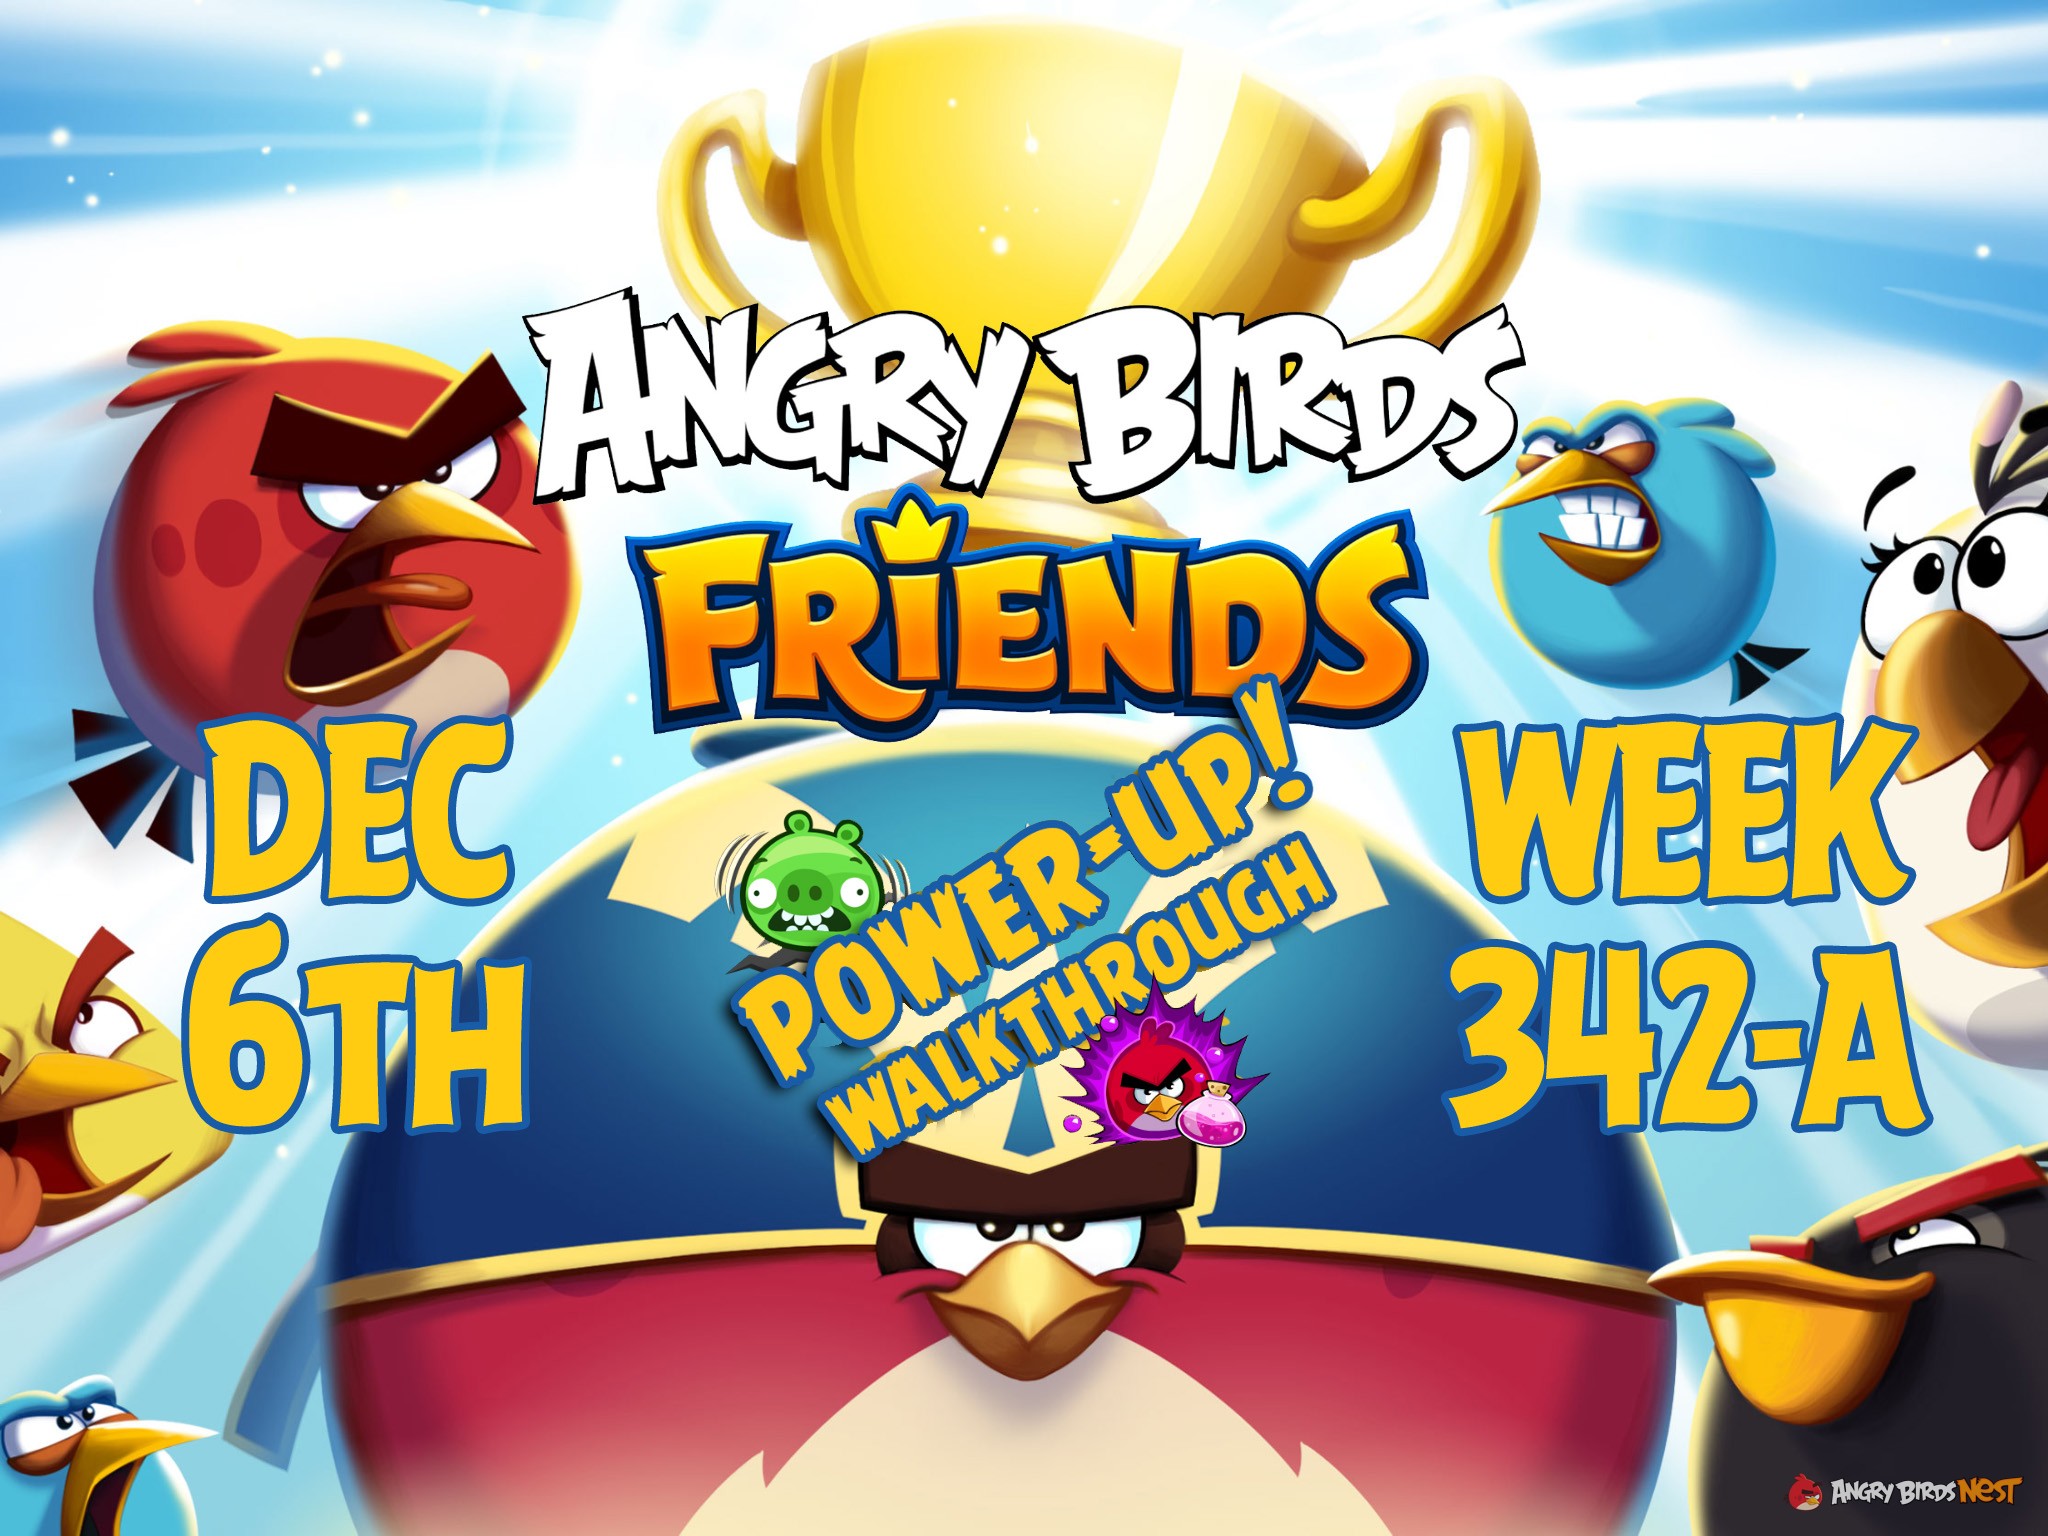 Angry-Birds-Friends-Tournament-Week-342-A-Feature-Image-PU